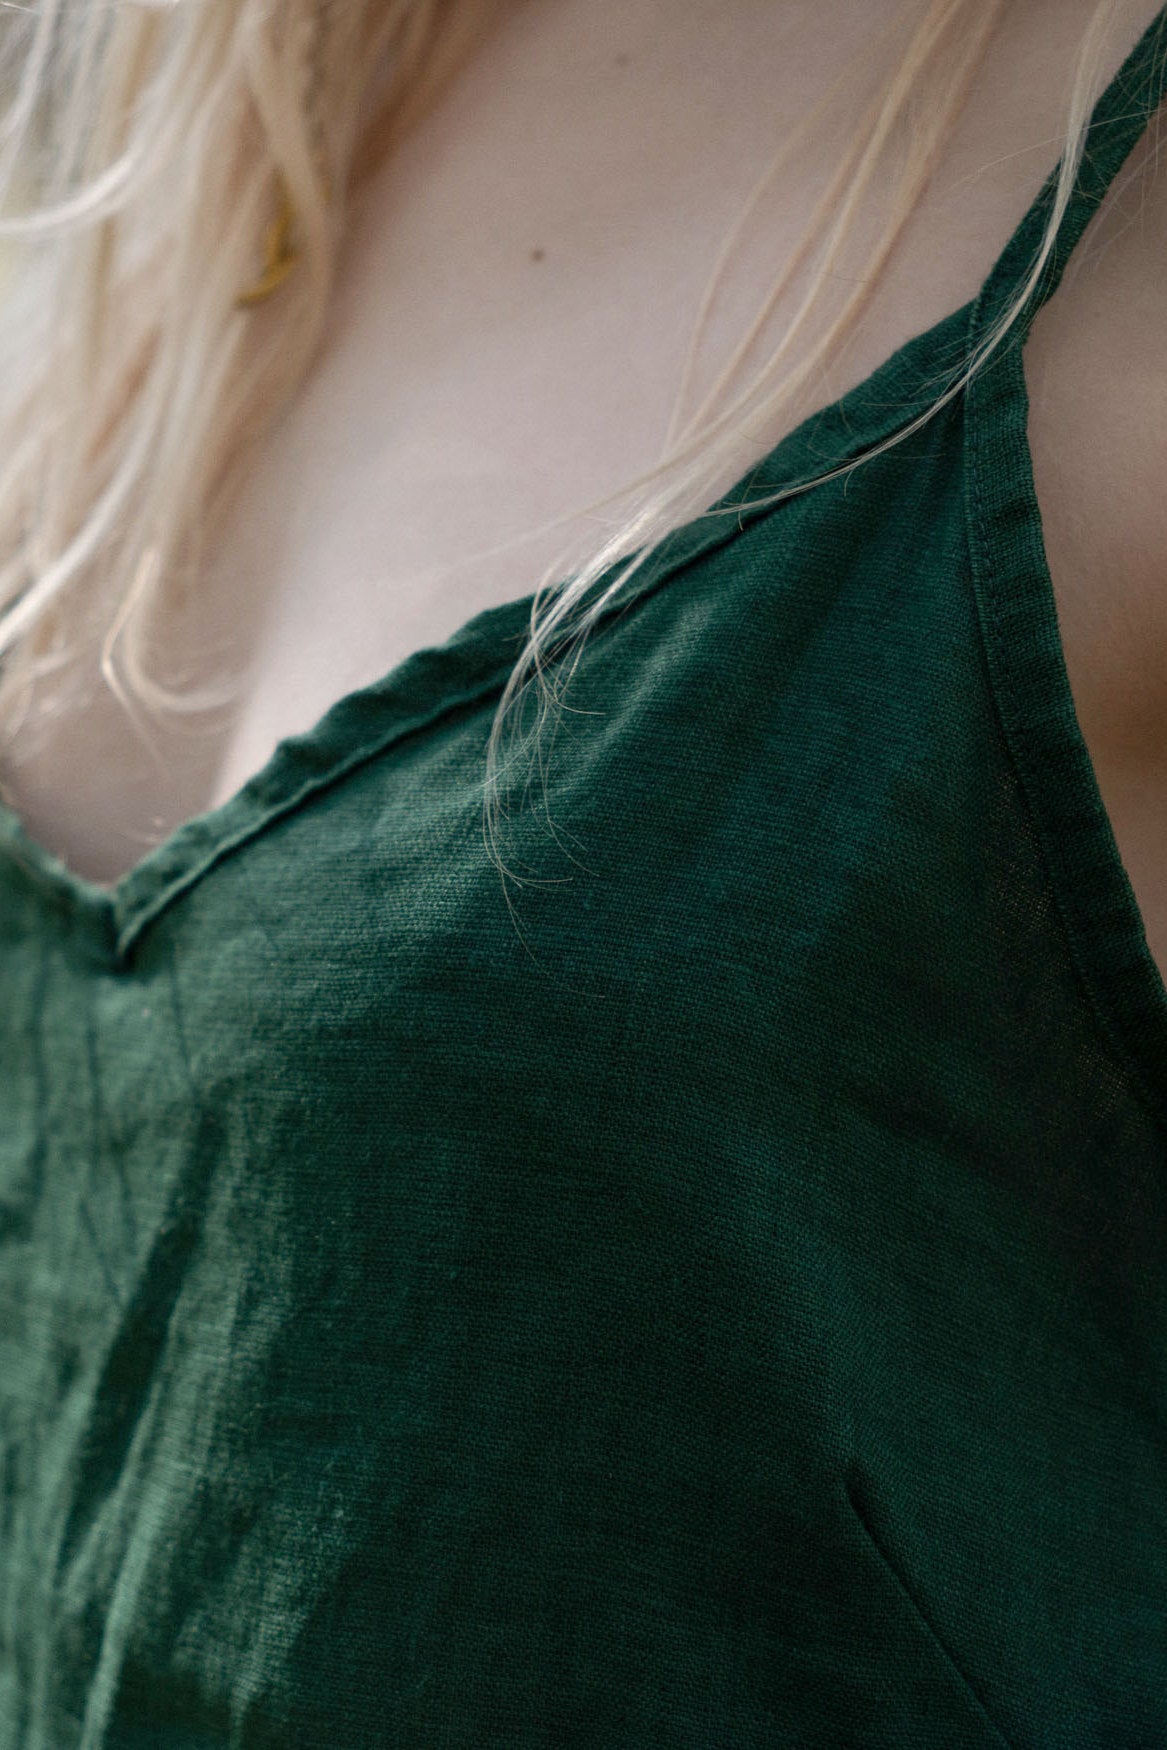 Organic, sustainable and sexy at the same time! Agasåga green short natural linen slip dress, nightdress with straps. This sleepwear is natural, soft, breathable and pure. It’s a conscious and healthy choice for your body and environment that embraces genuine selflove and selfcare. Handmade with love in the North.